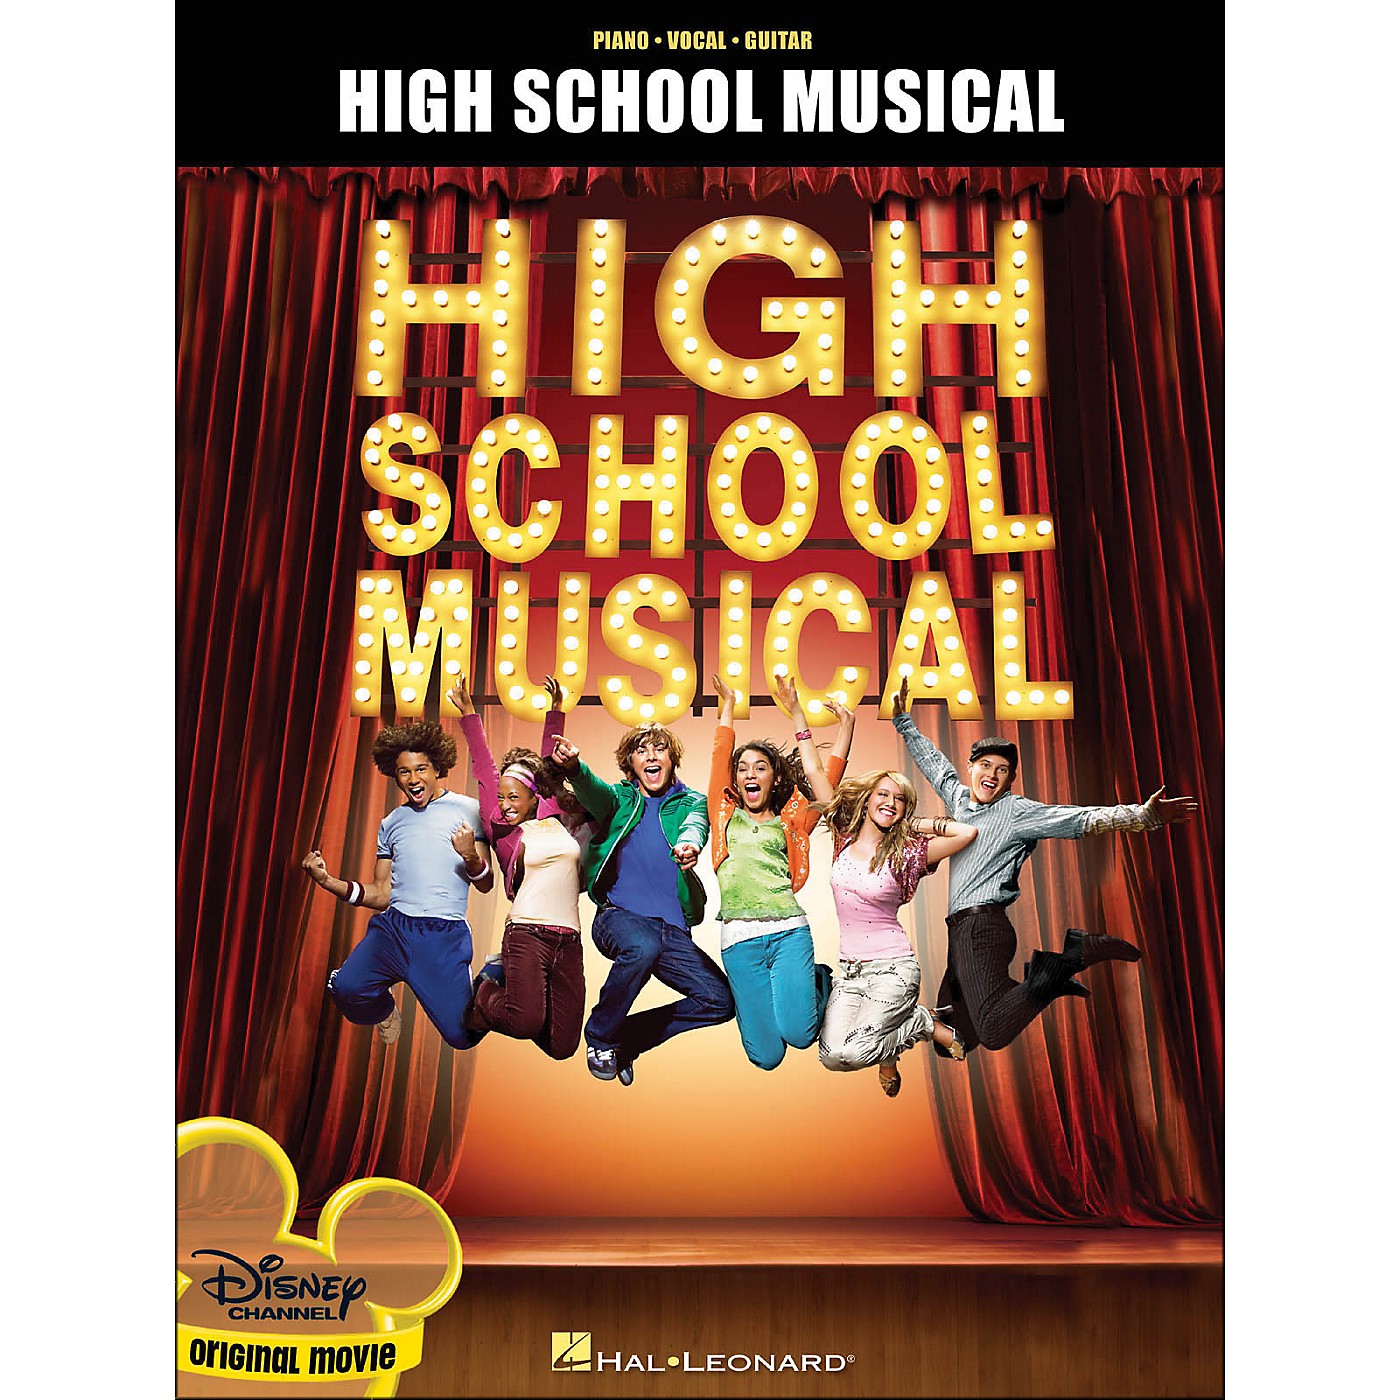 Hal Leonard High School Musical From The Hit Disney Channel Original Movie arranged for piano, vocal, and guitar (P/V/G) thumbnail